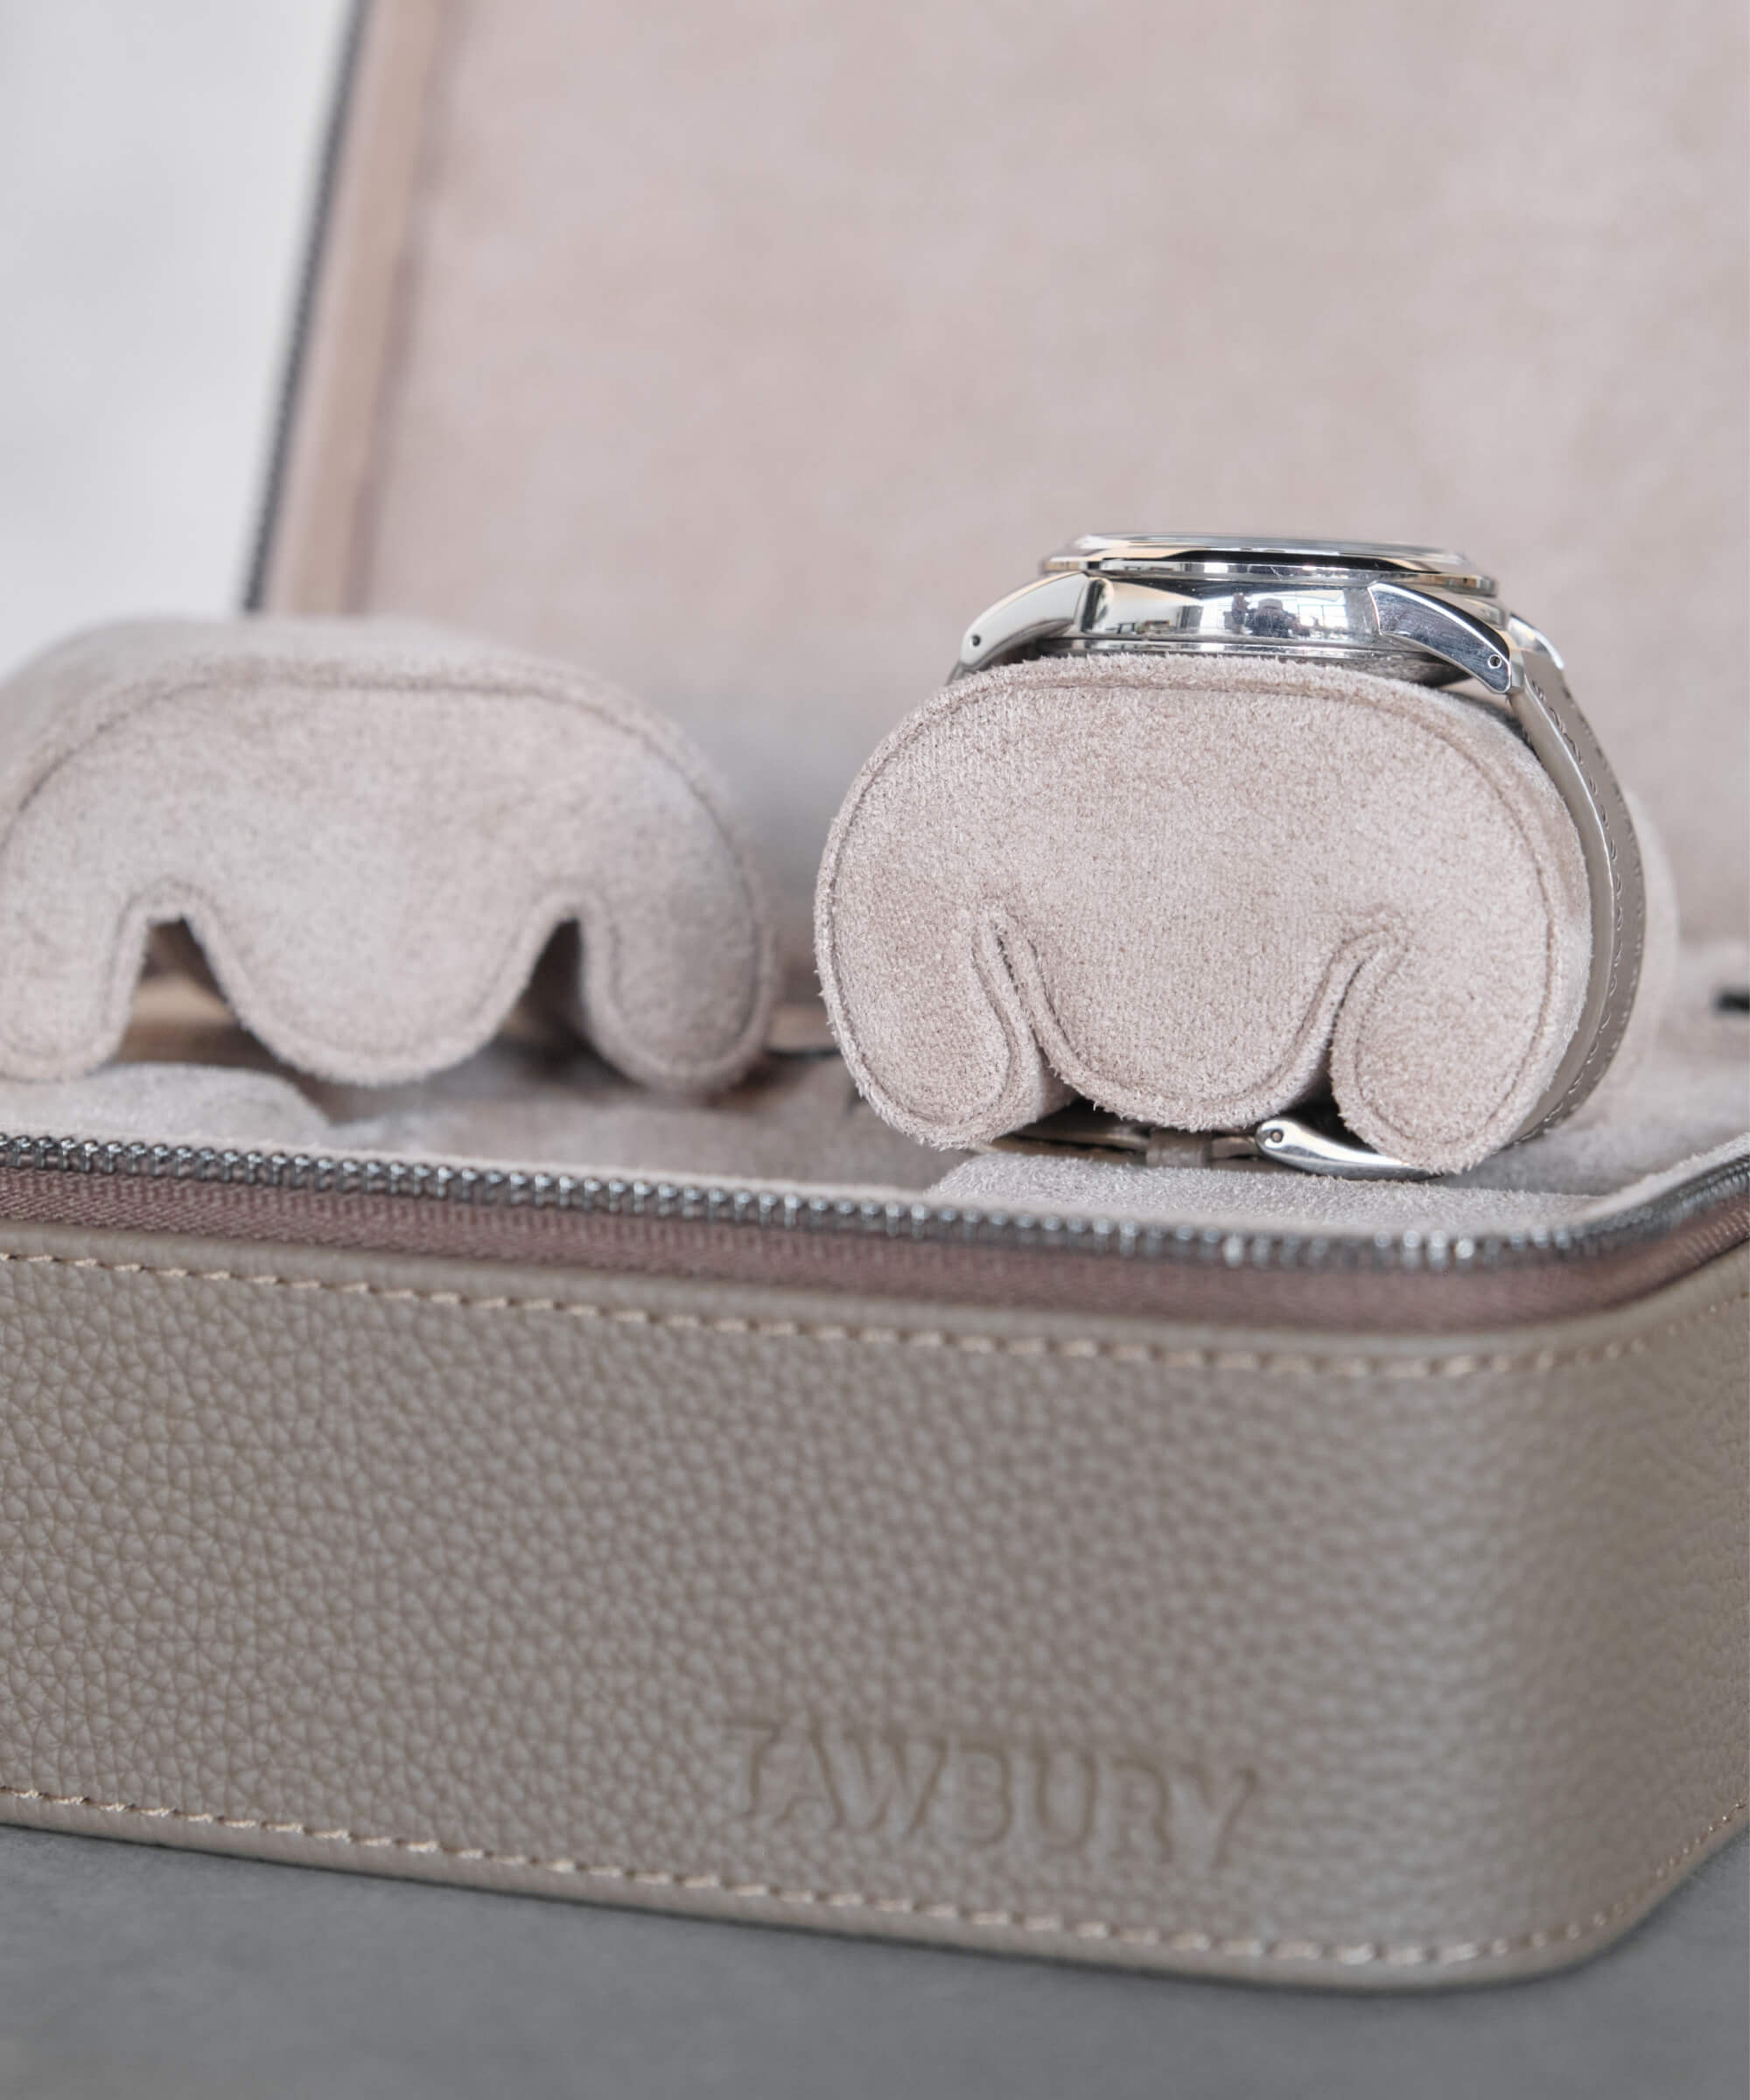 A close-up of a beige watch travel case with the brand name "TAWBURY" embossed on it. Inside, the wristwatch is secured on one of the slender Fraser Replacement Watch Case Pillows - X-Small - Taupe/Cream, ensuring maximum protection for your timepiece.